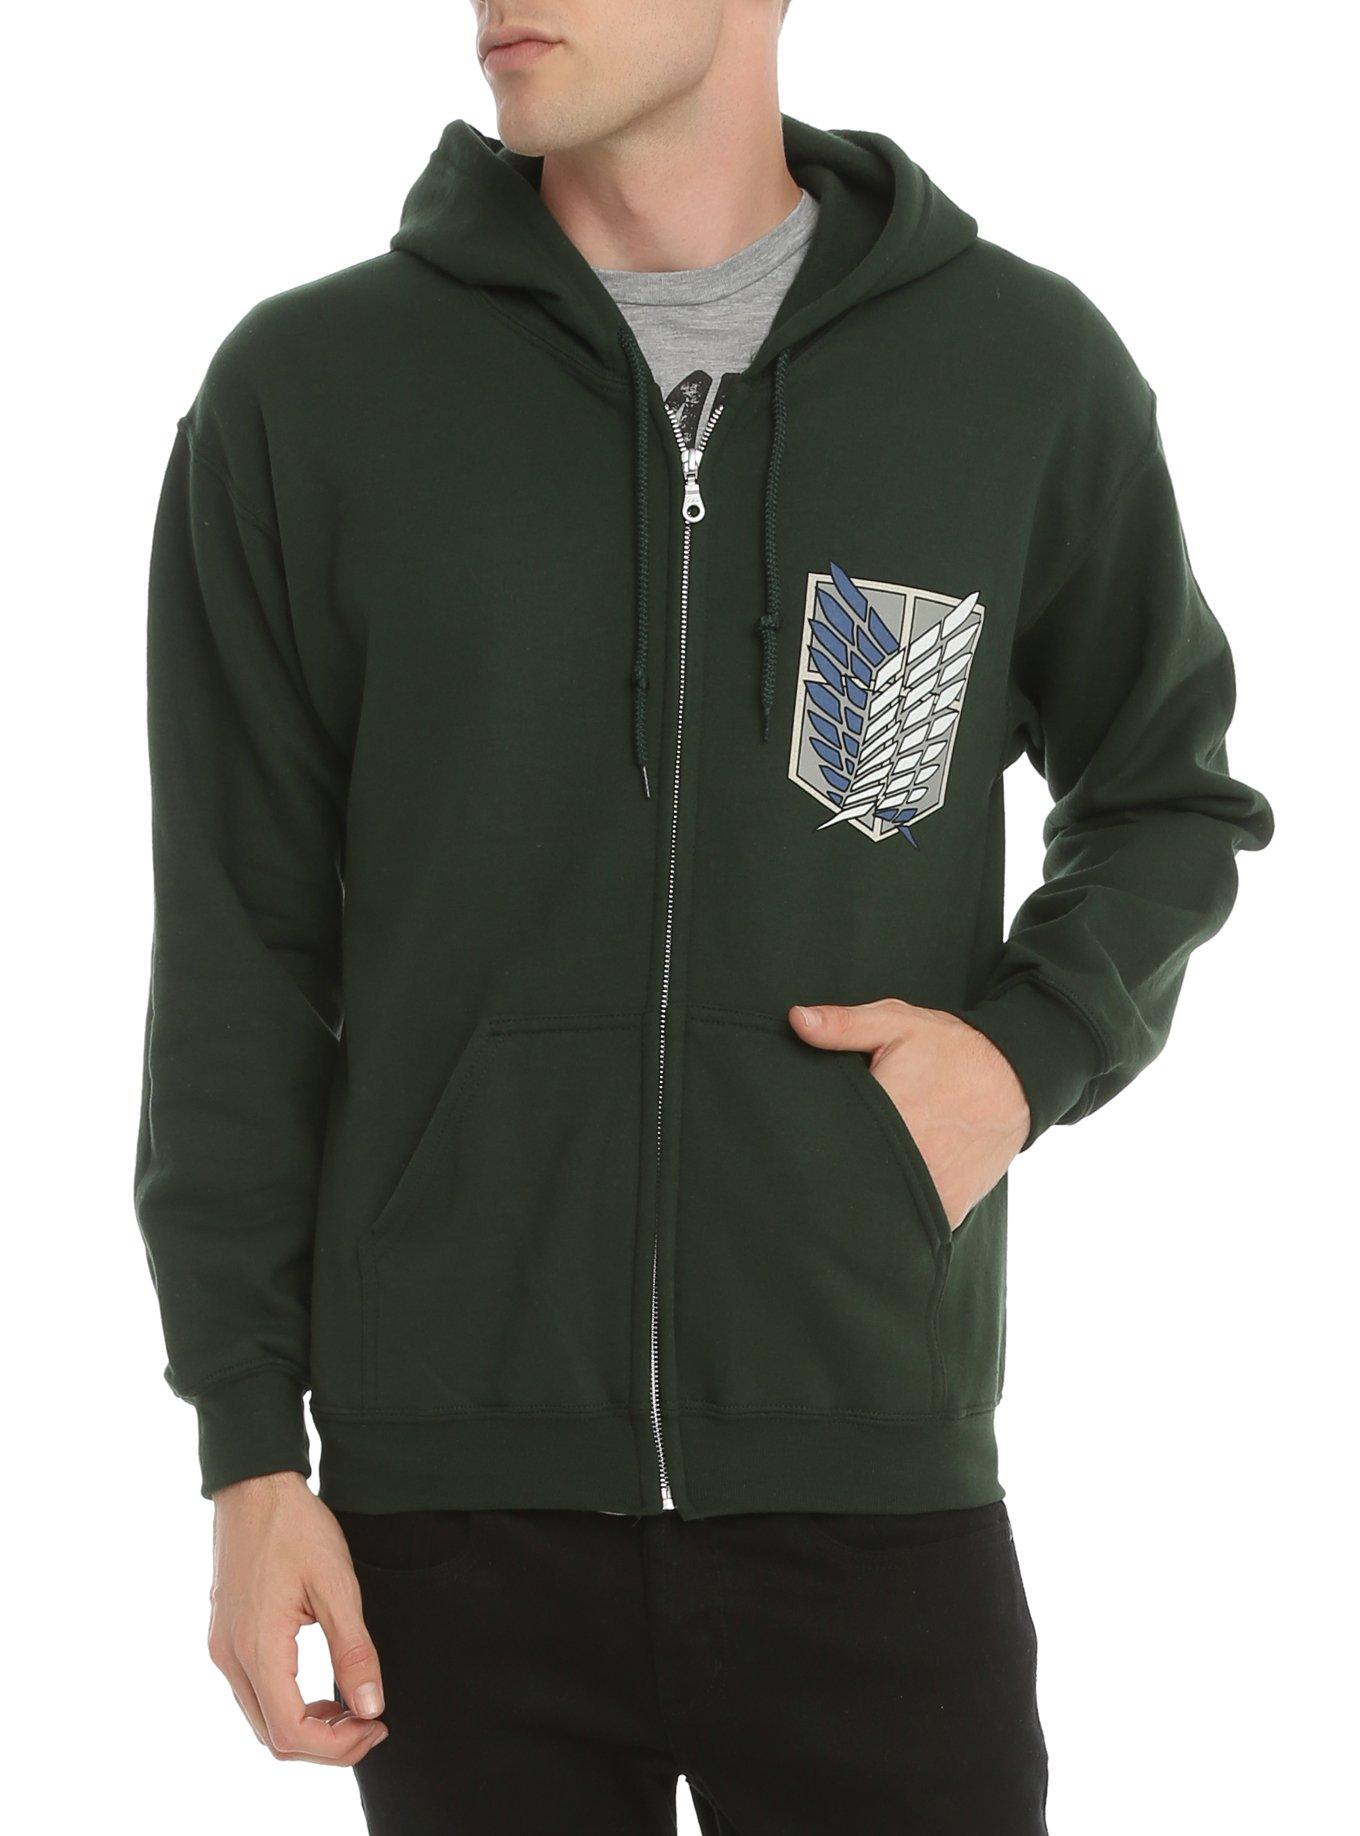 Attack On Titan Scout Regiment Shield Zip Hoodie | Hot Topic